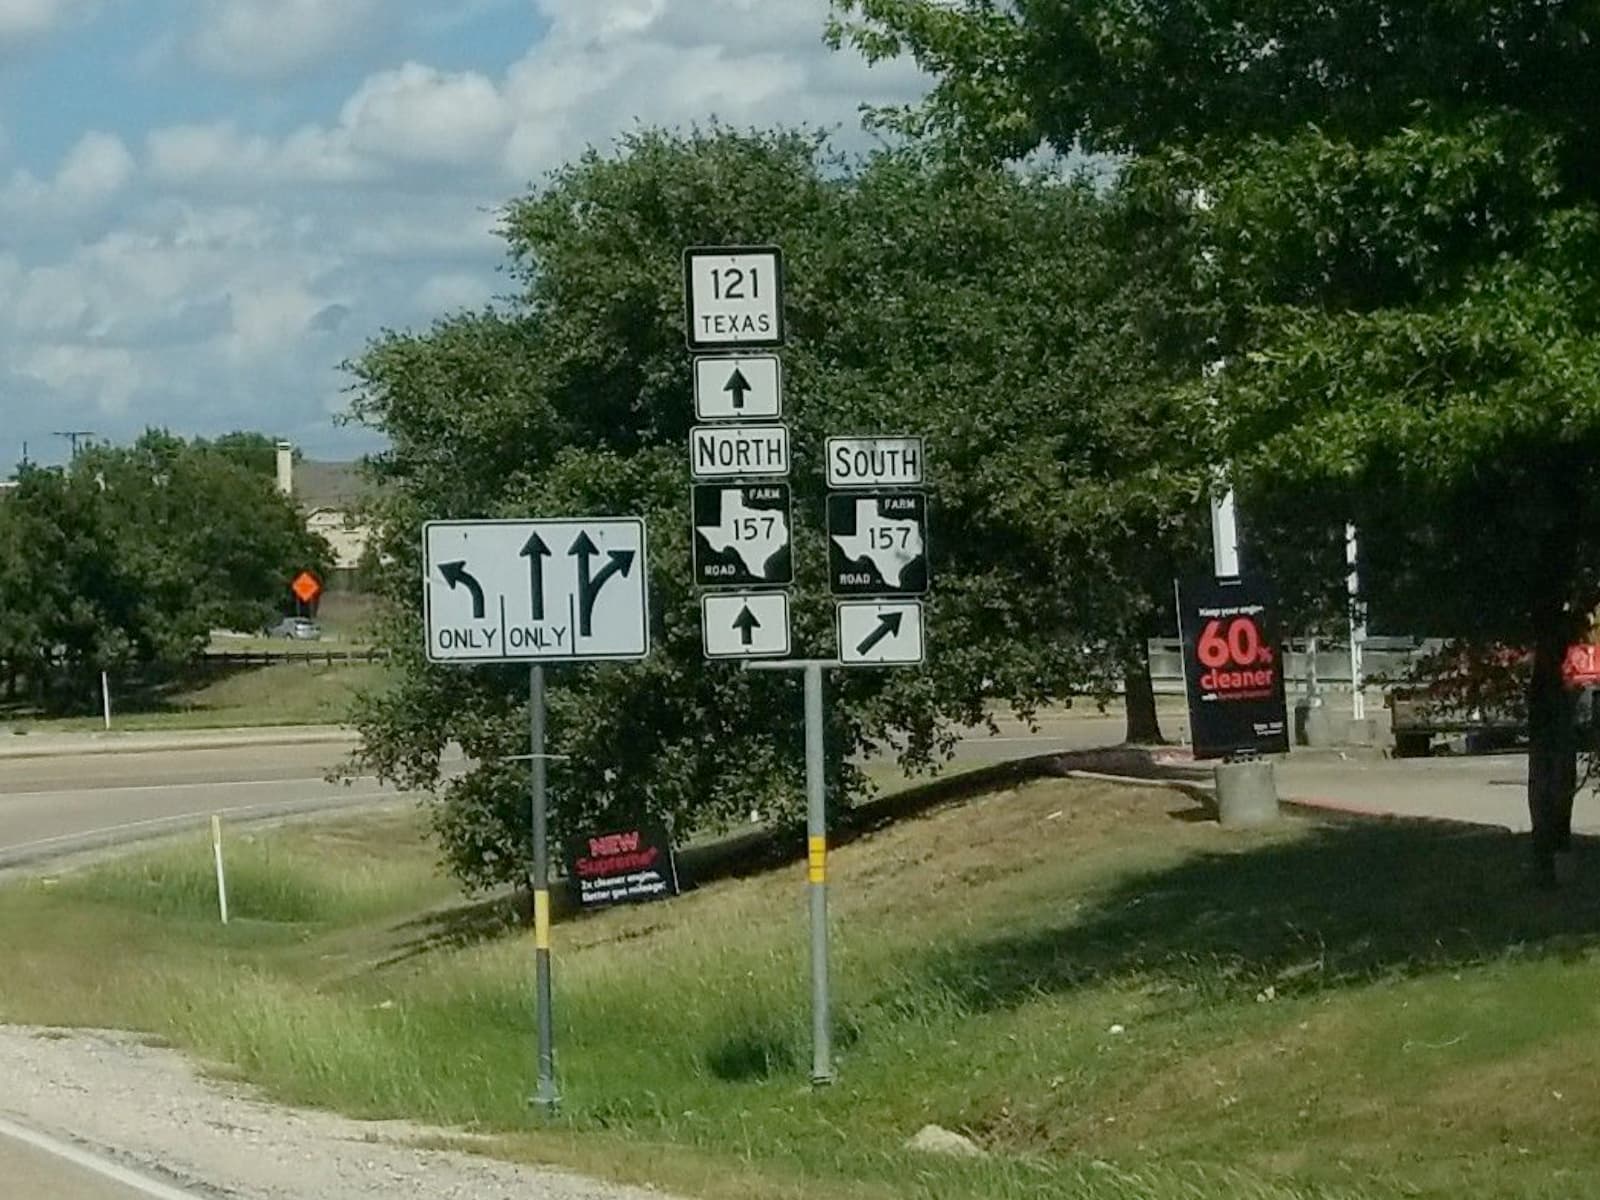 A sign assembly consisting of a State Highway 121 shield, with the name “TEXAS” below the number 121, as well as two Farm to Market Road shields in the shape of Texas.